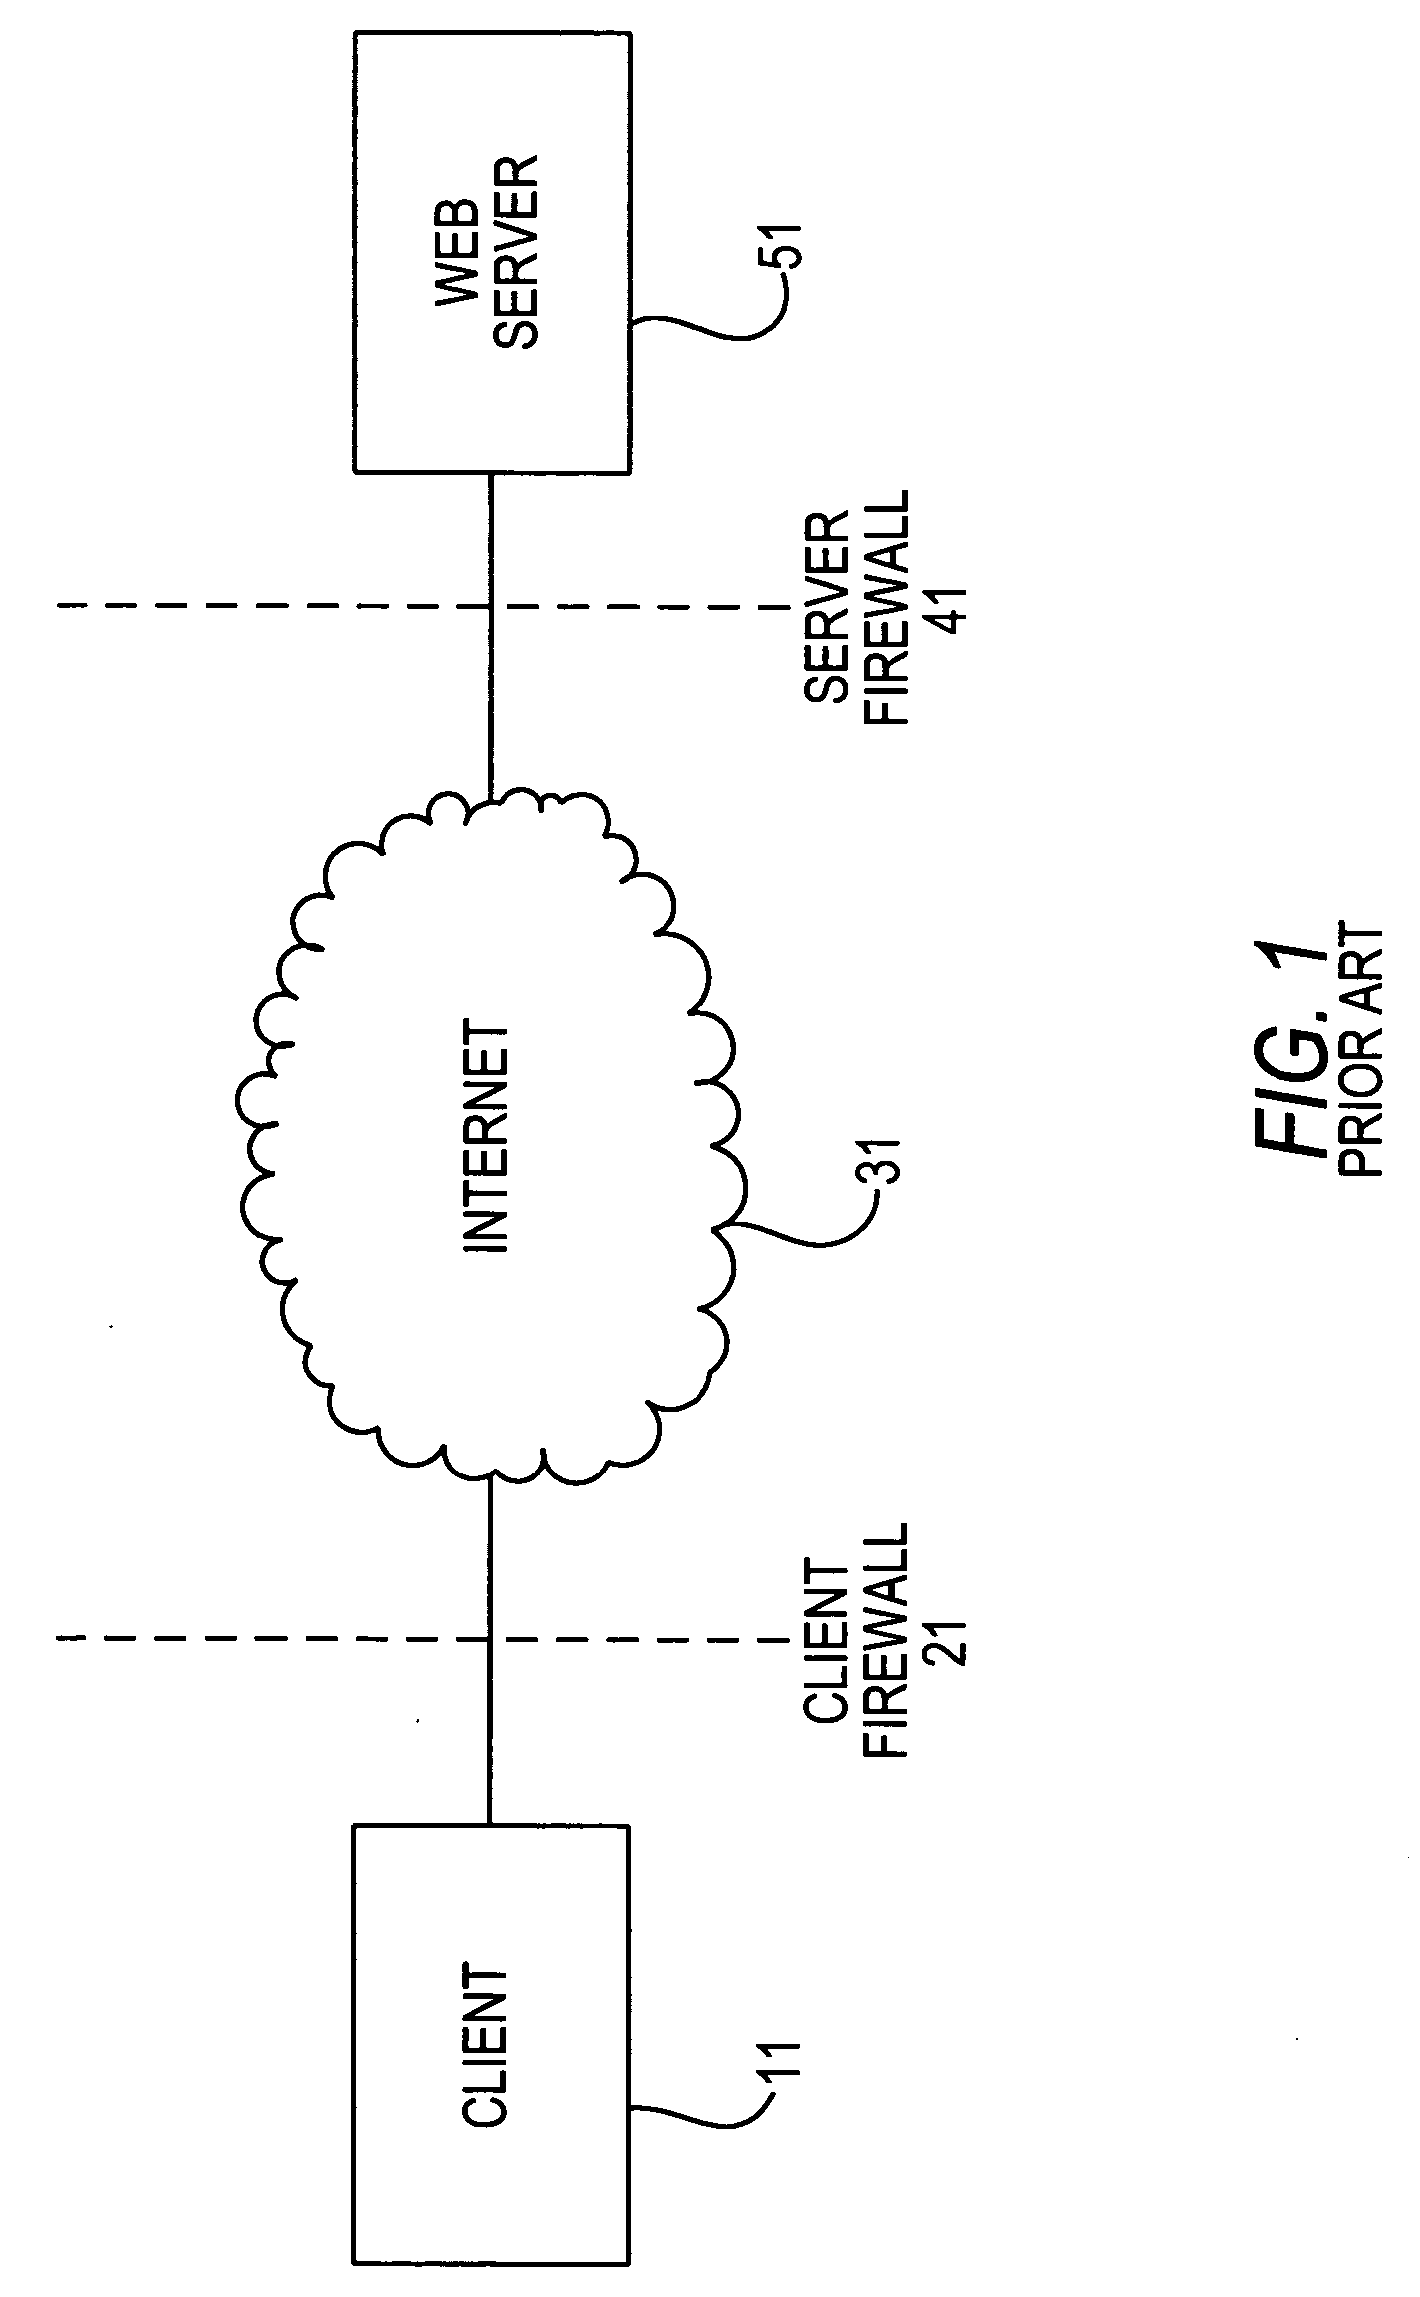 Asynchronous hypertext messaging system and method